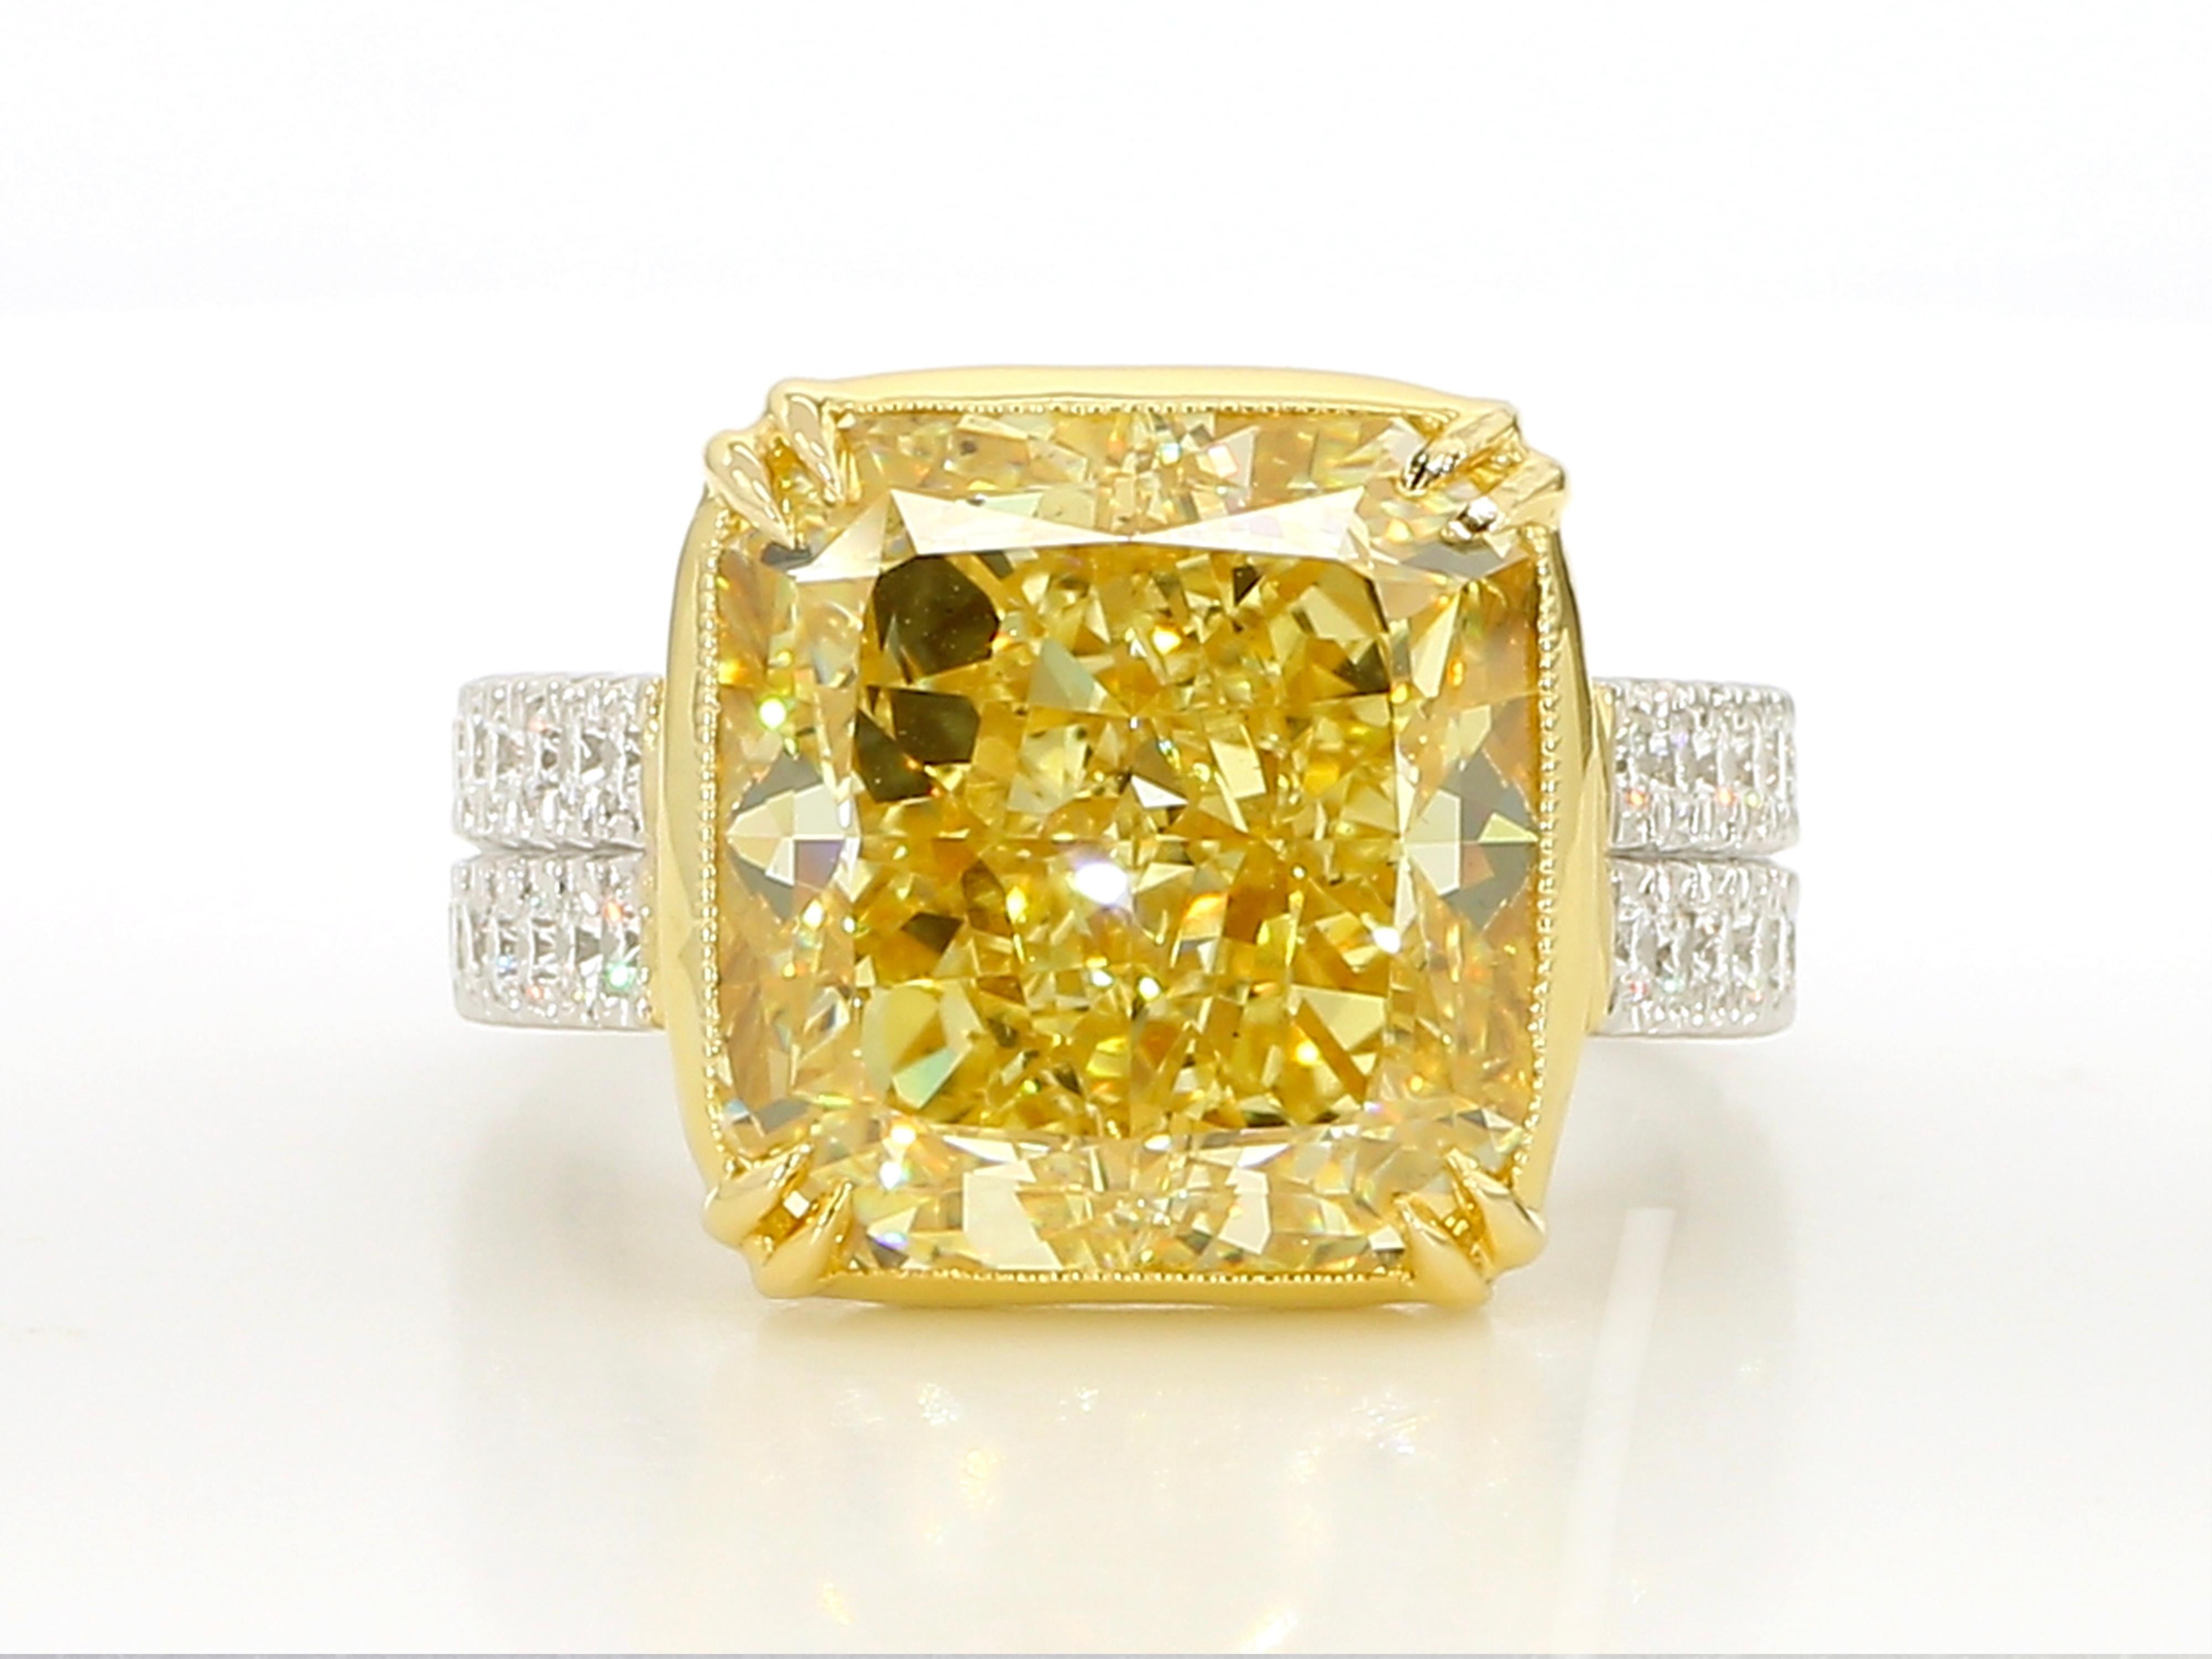 Just under 12 Carat Fancy Yellow Diamond Engagement Ring, In Platinum GIA Cert. For Sale 2